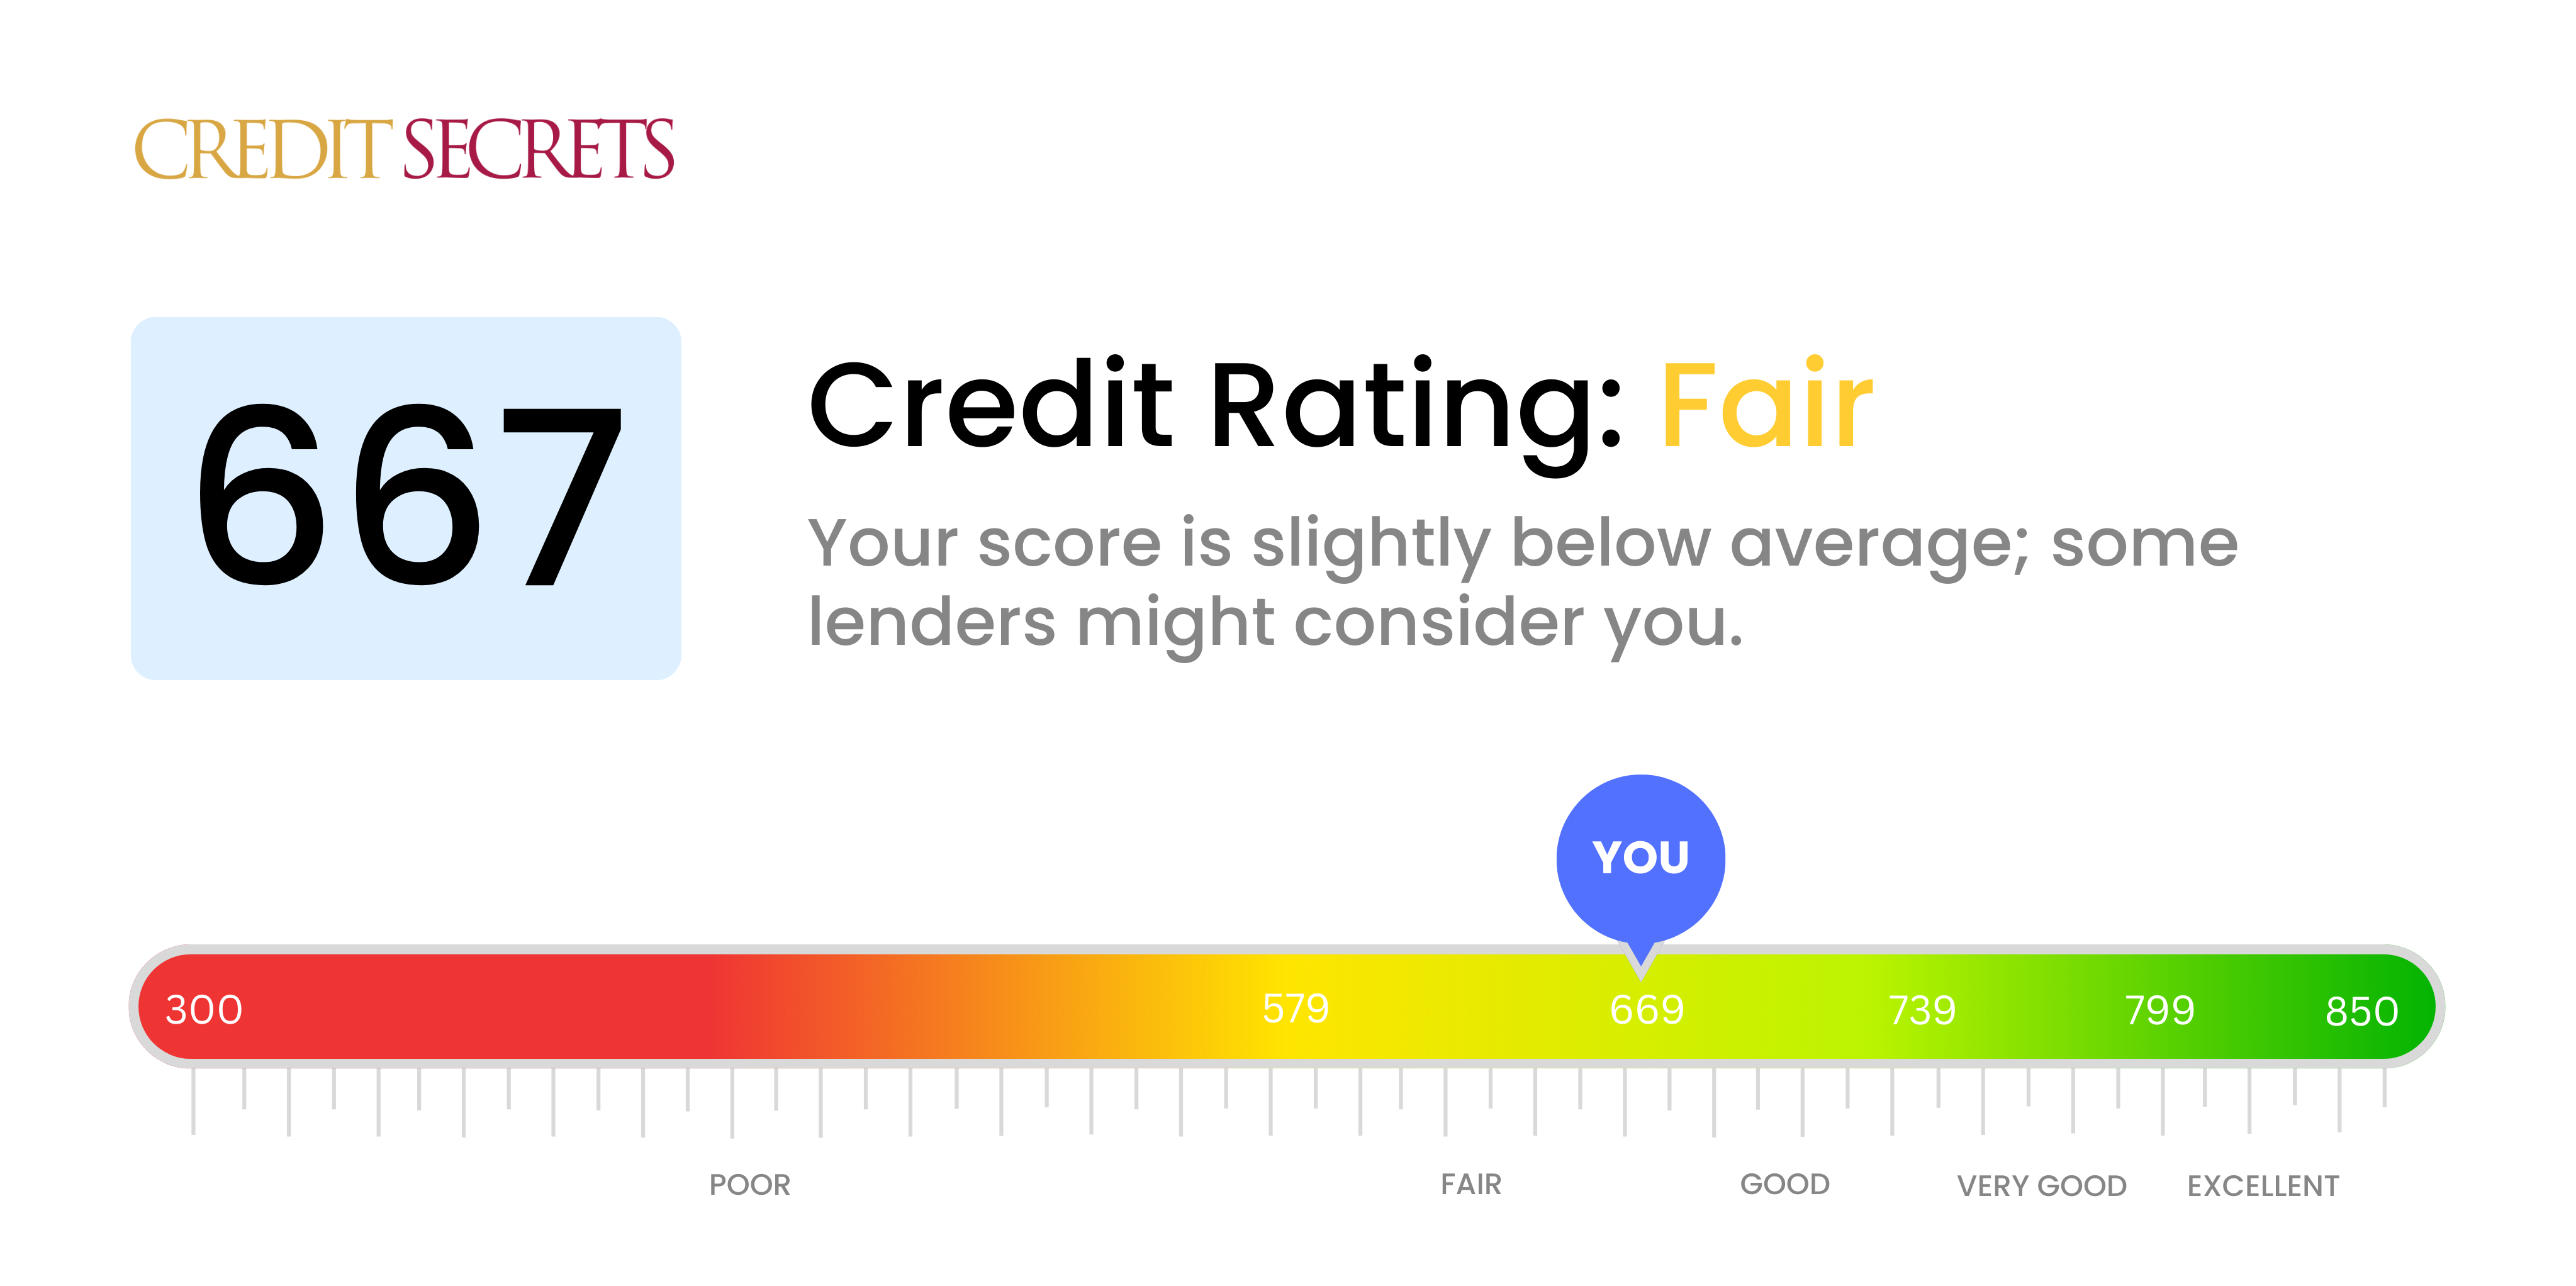 Is 667 a good credit score?